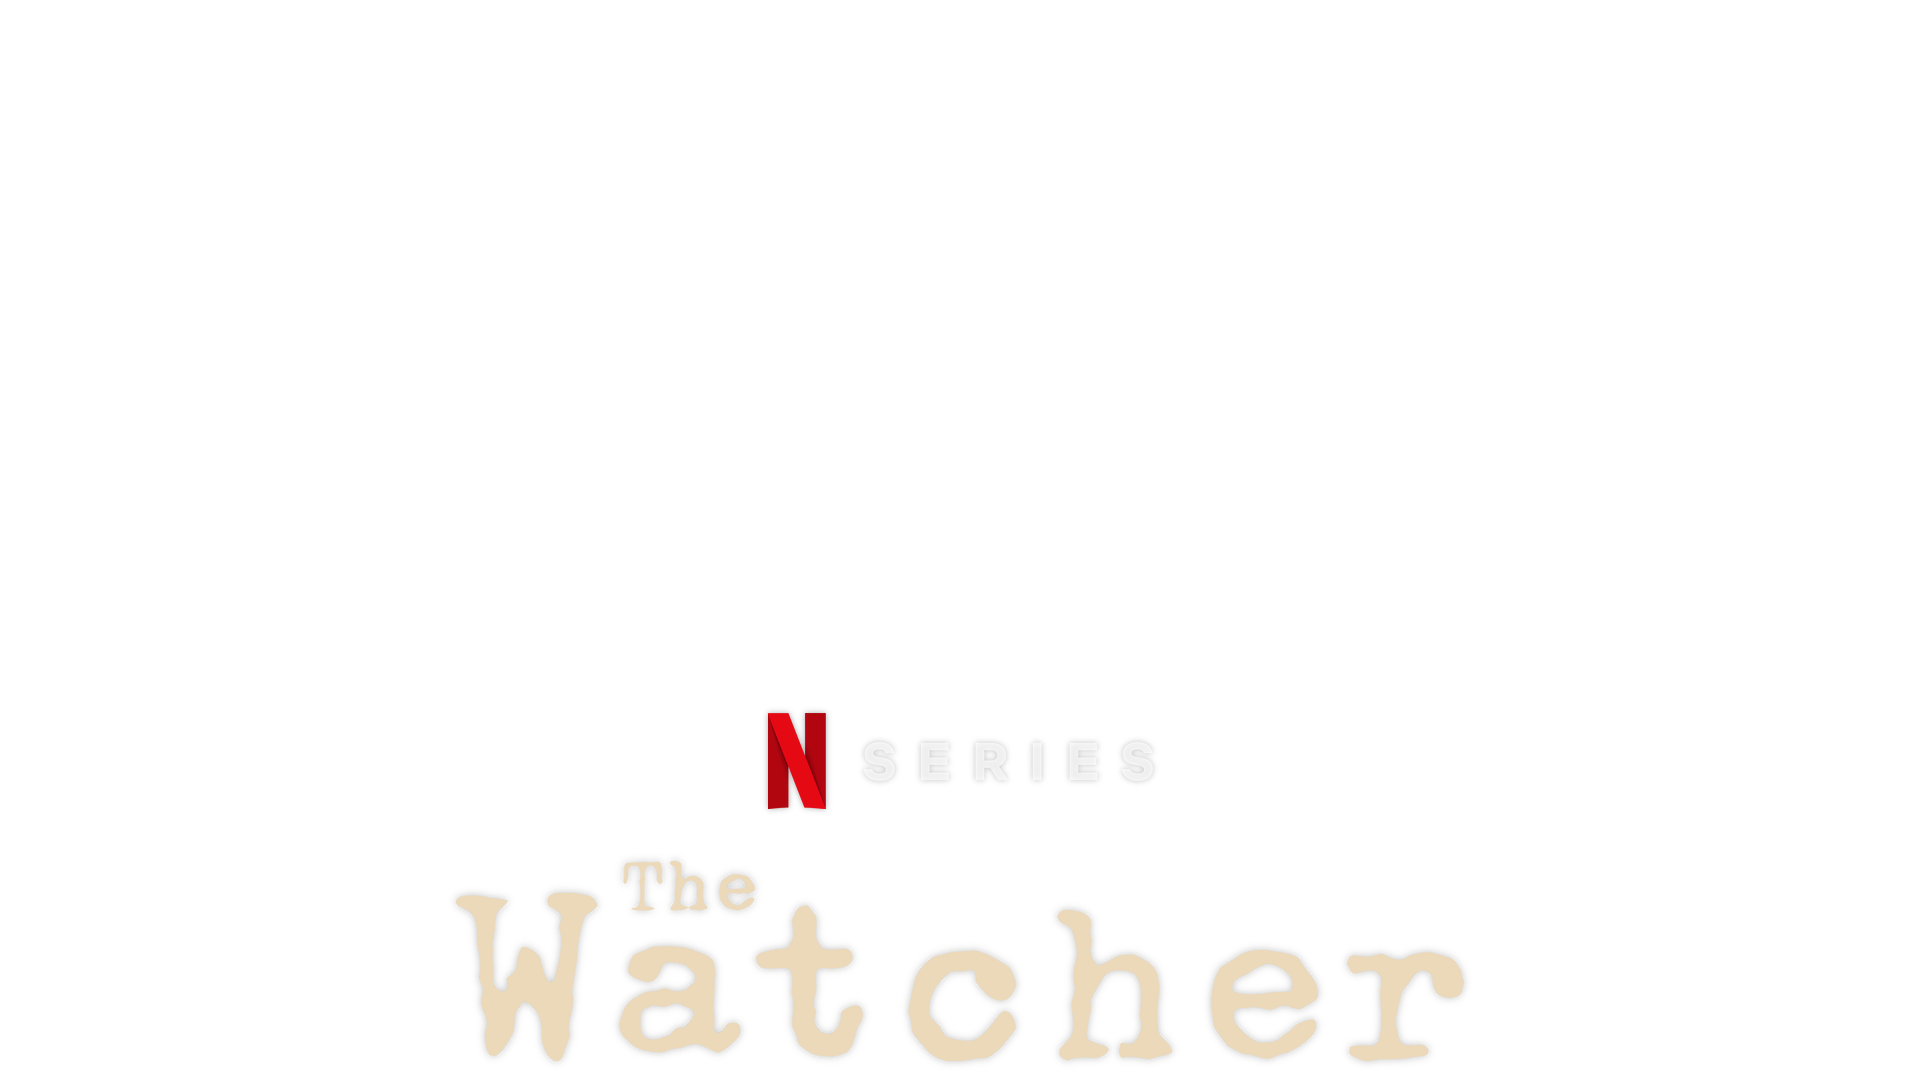 The Watcher” on Netflix – The Tribe